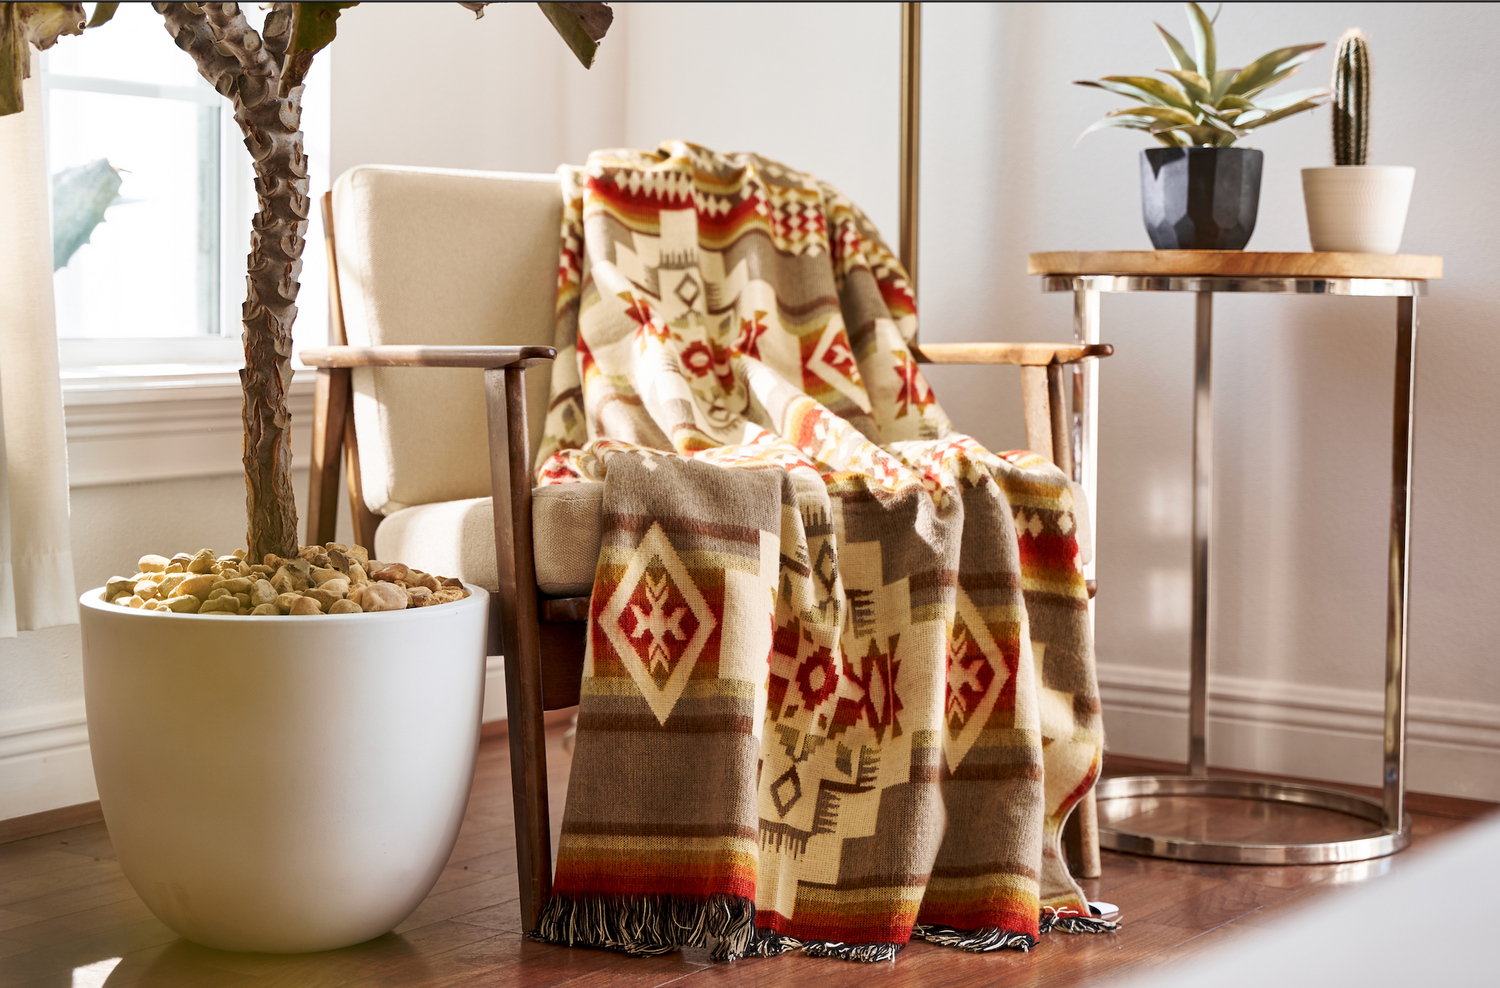 How to Use Southwestern-Inspired Patterns to Brighten Up Your Home